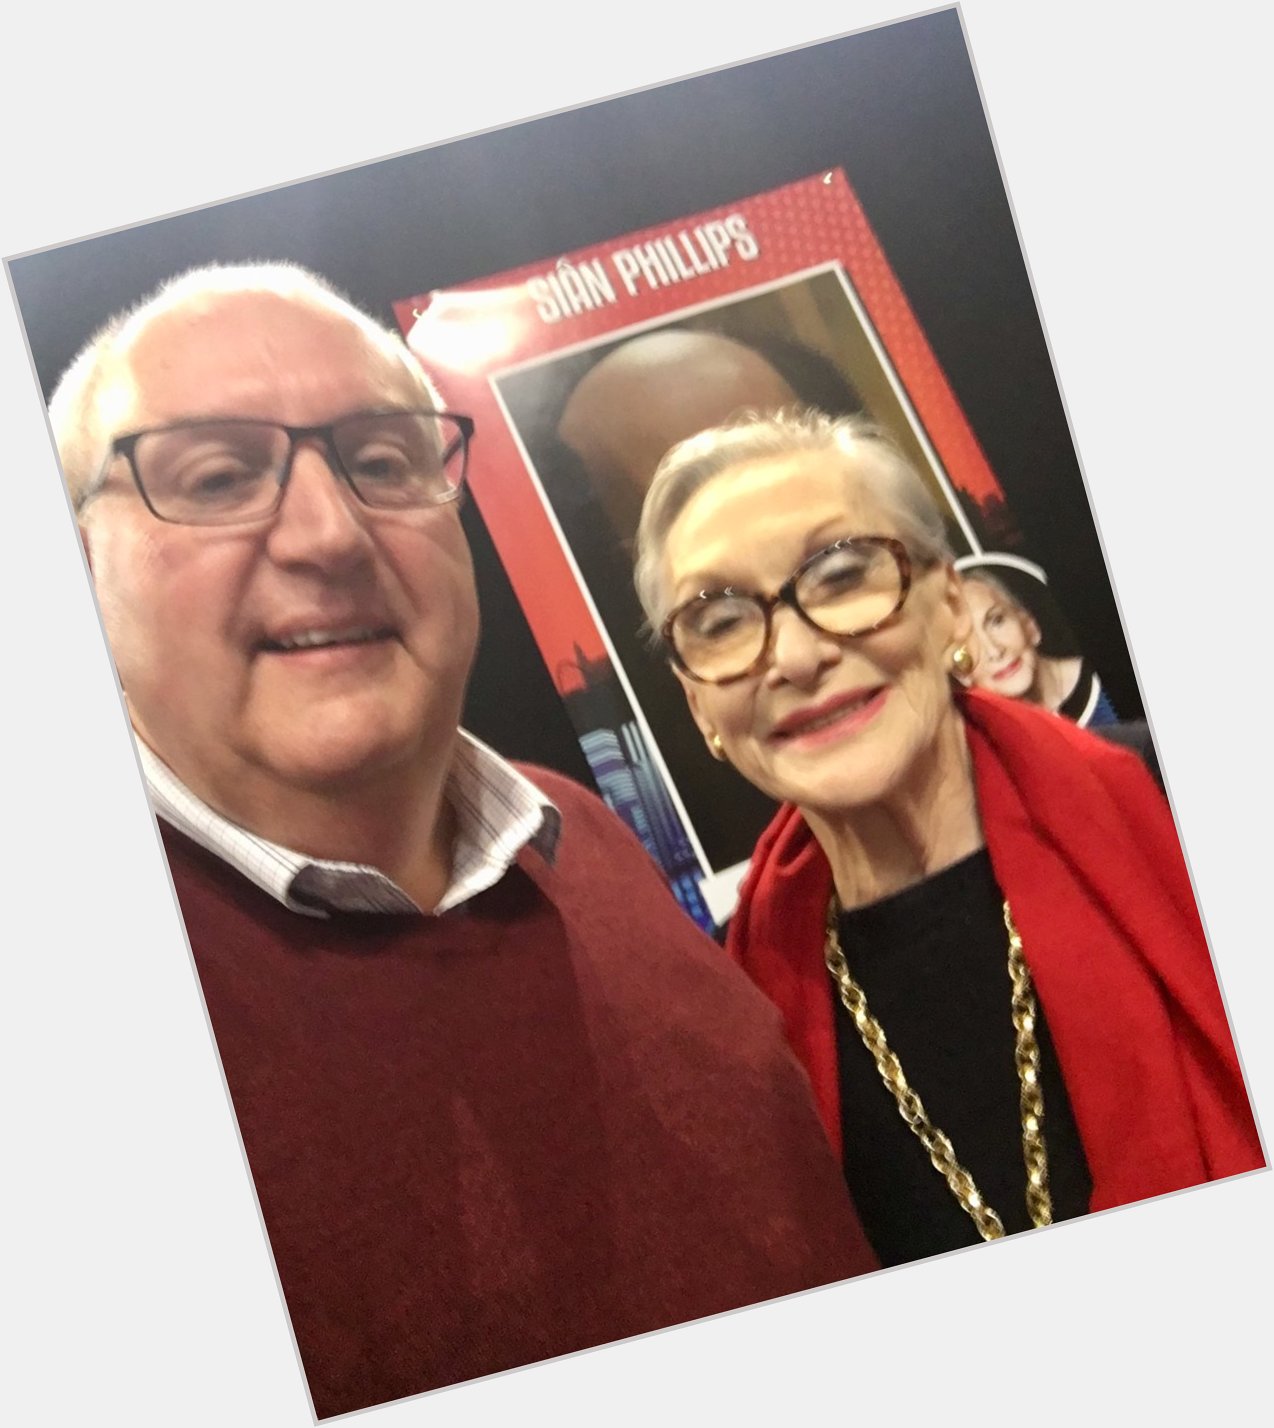  meeting Sian Phillips. Happy birthday to a lovely lady. 